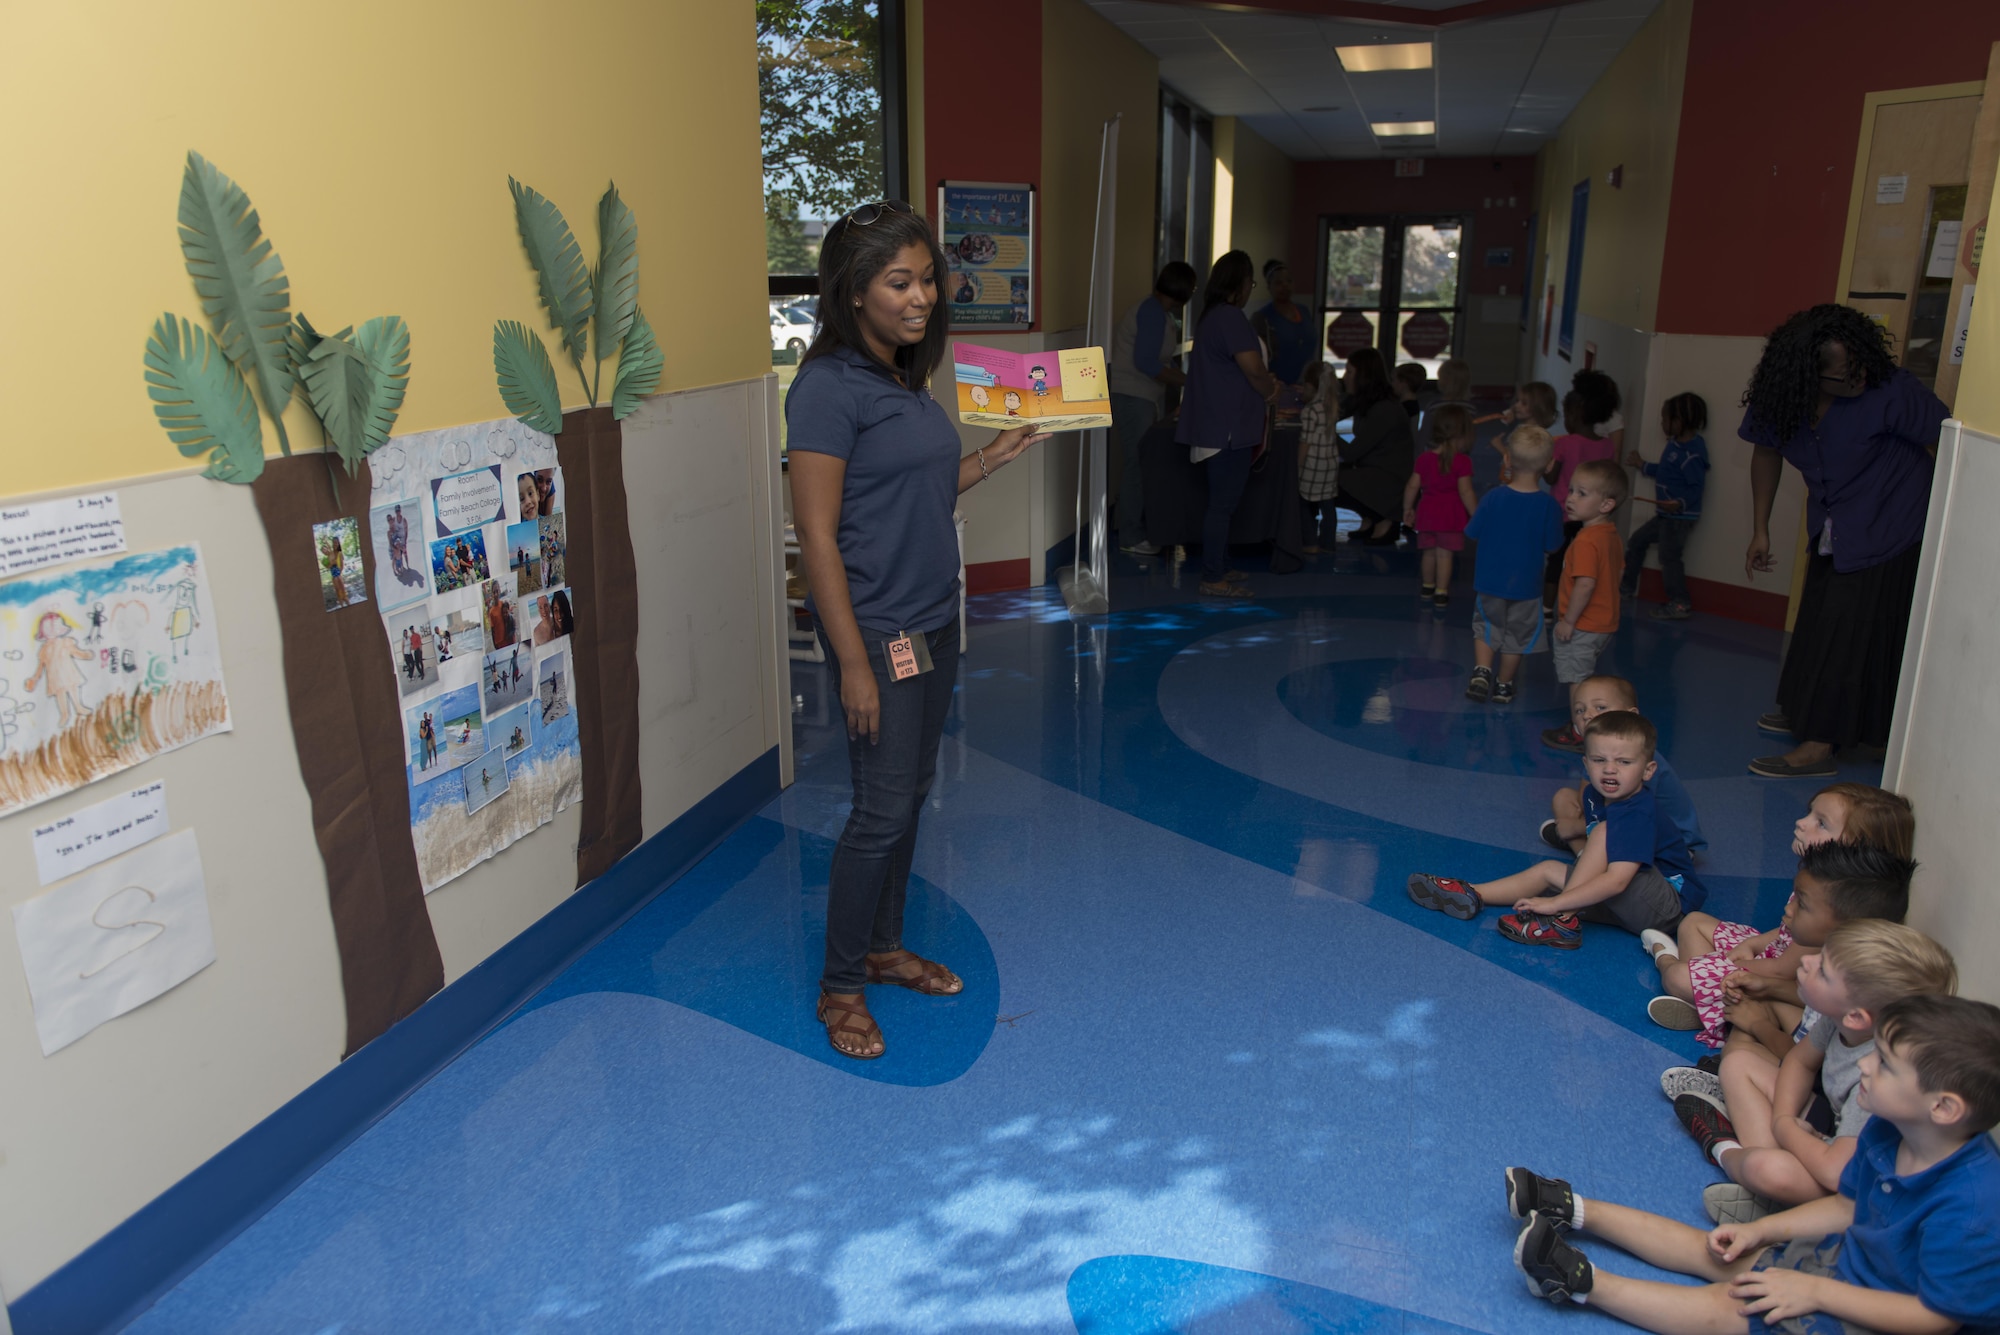 Nicole Lewis, USO Programs Manager,  reads “It’s the Great Pumpkin, Charlie Brown” to children in the Child Development Center Oct 12, 2016 on Keesler Air Force Base, Miss. The USO-led event was held to commemorate the book’s 50th anniversary.  (U.S. Air Force photo by Andre’ Askew/Released)